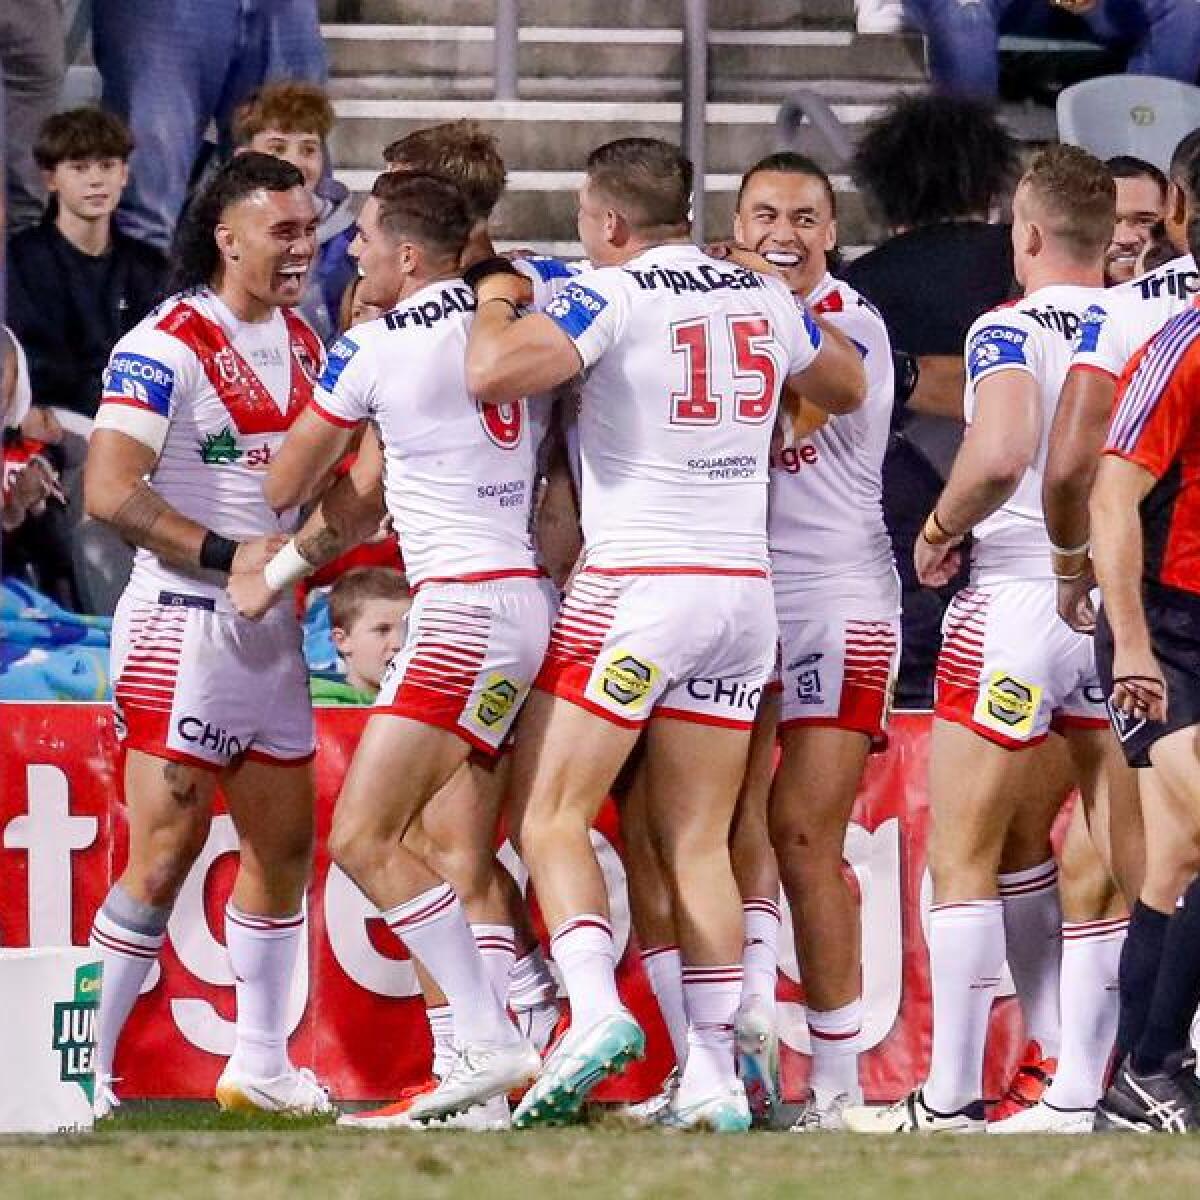 Dragons players celebrate after a try.